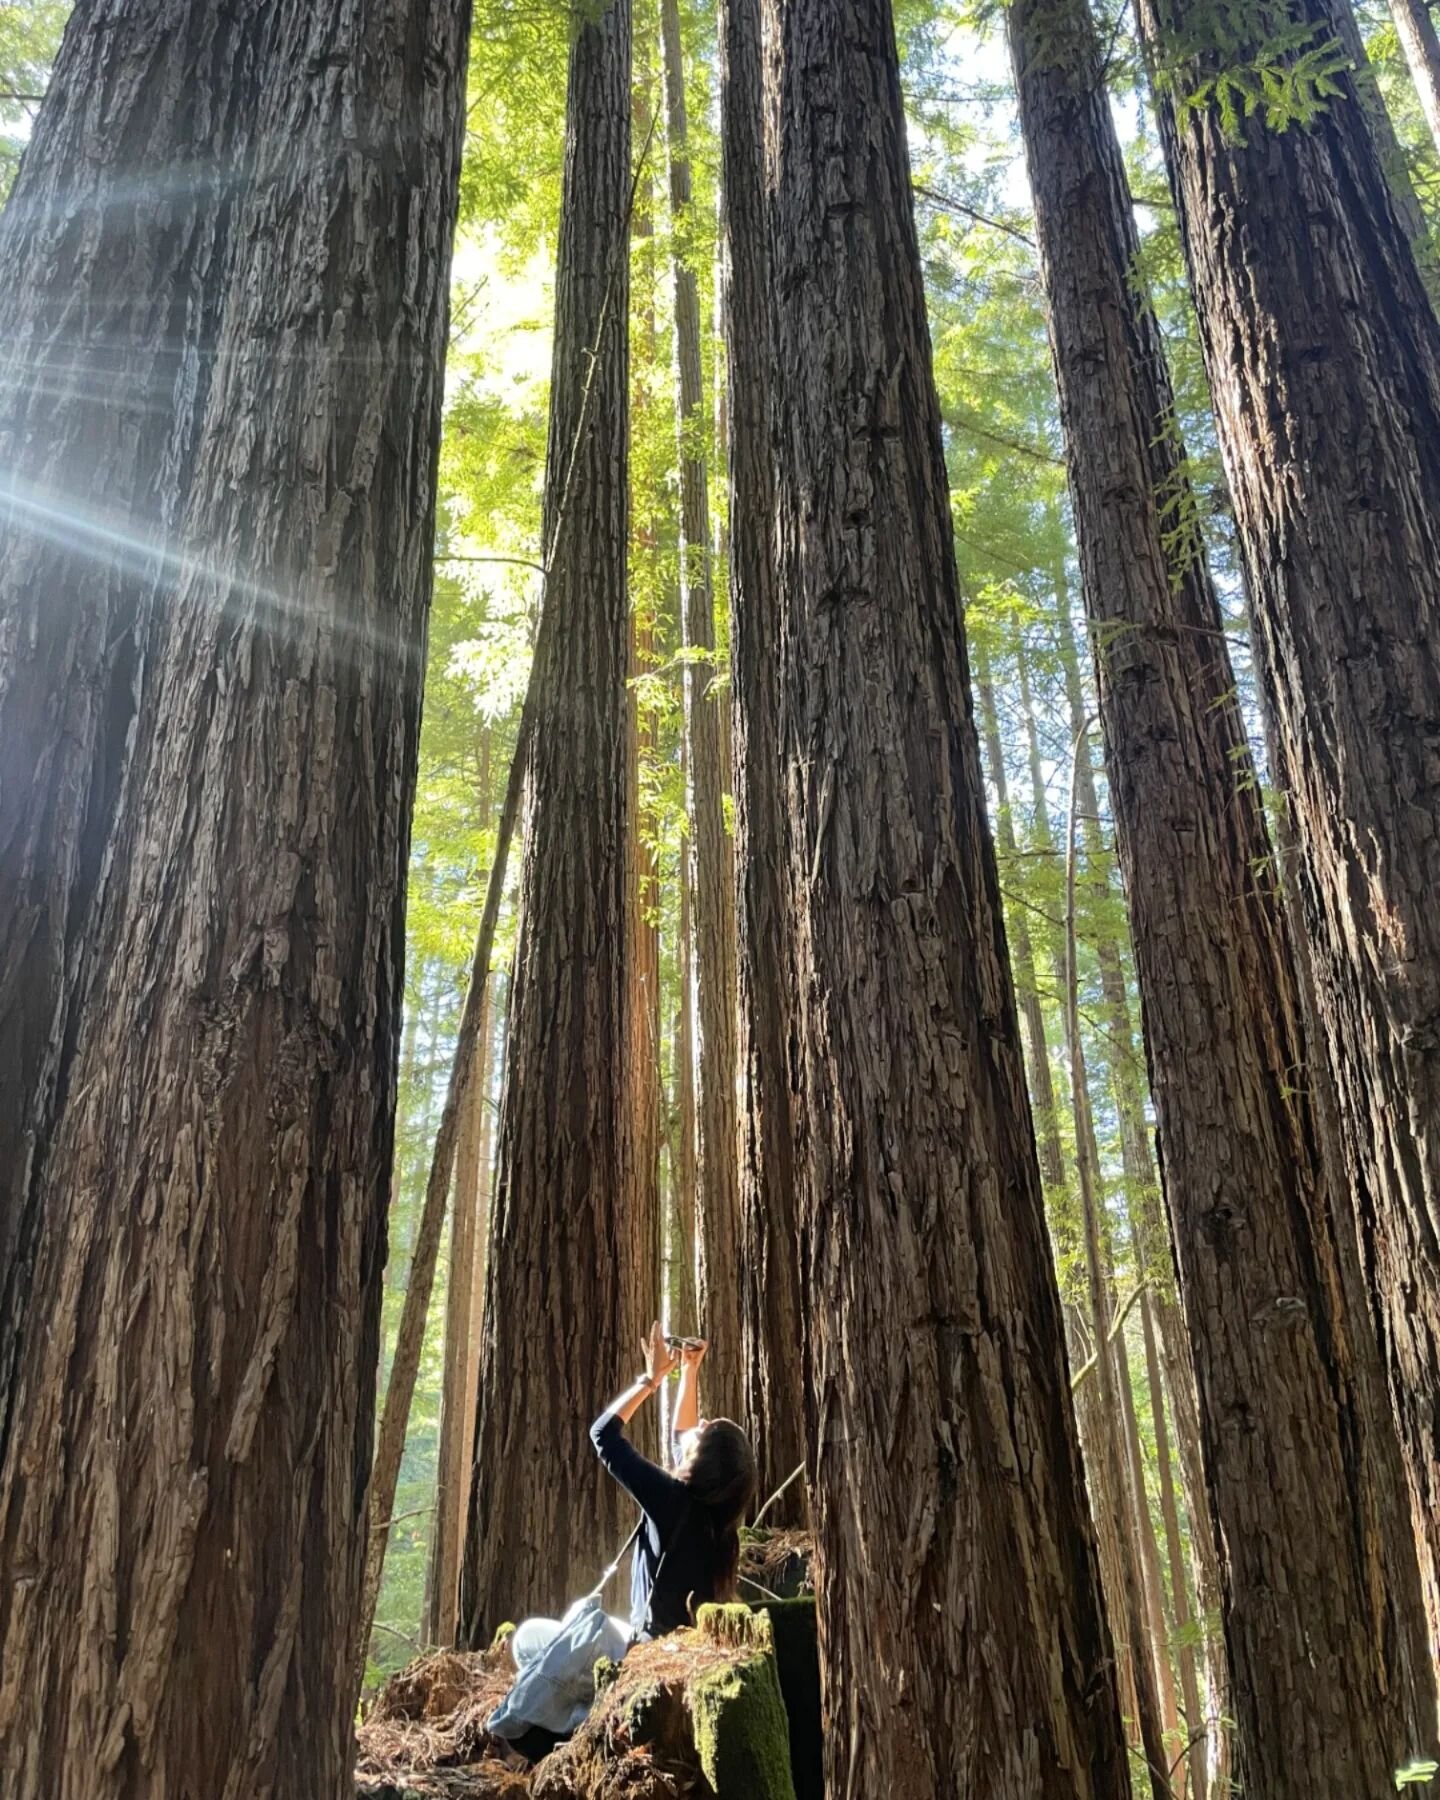 Hello redwoods ♡ // Thanks for the trip to spend time with the giants @heatherahrling